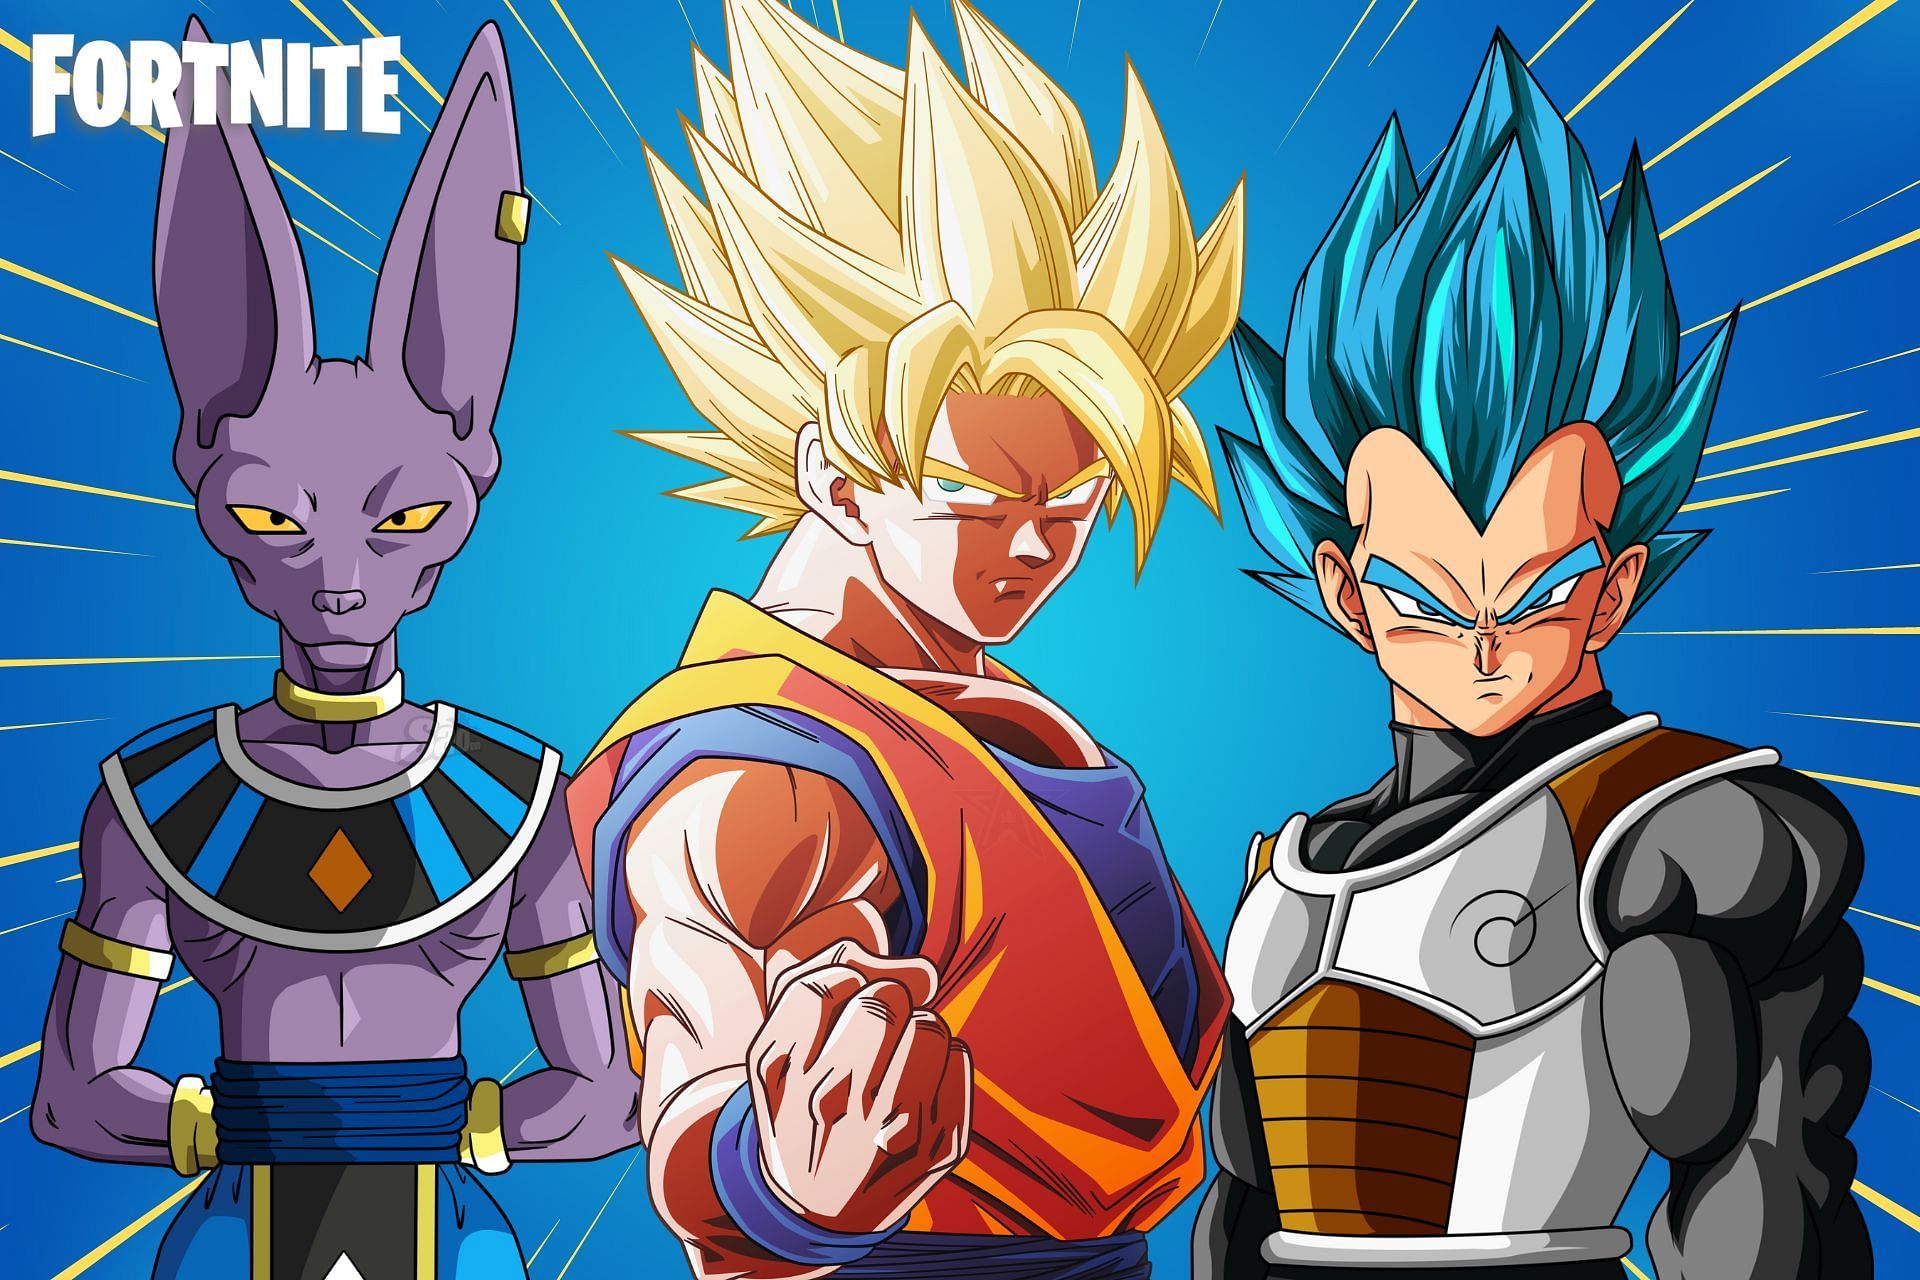 Beerus confirmed as a skin for the Dragon Ball collaboration in Fortnite Chapter 3 (Image via Sportskeeda)